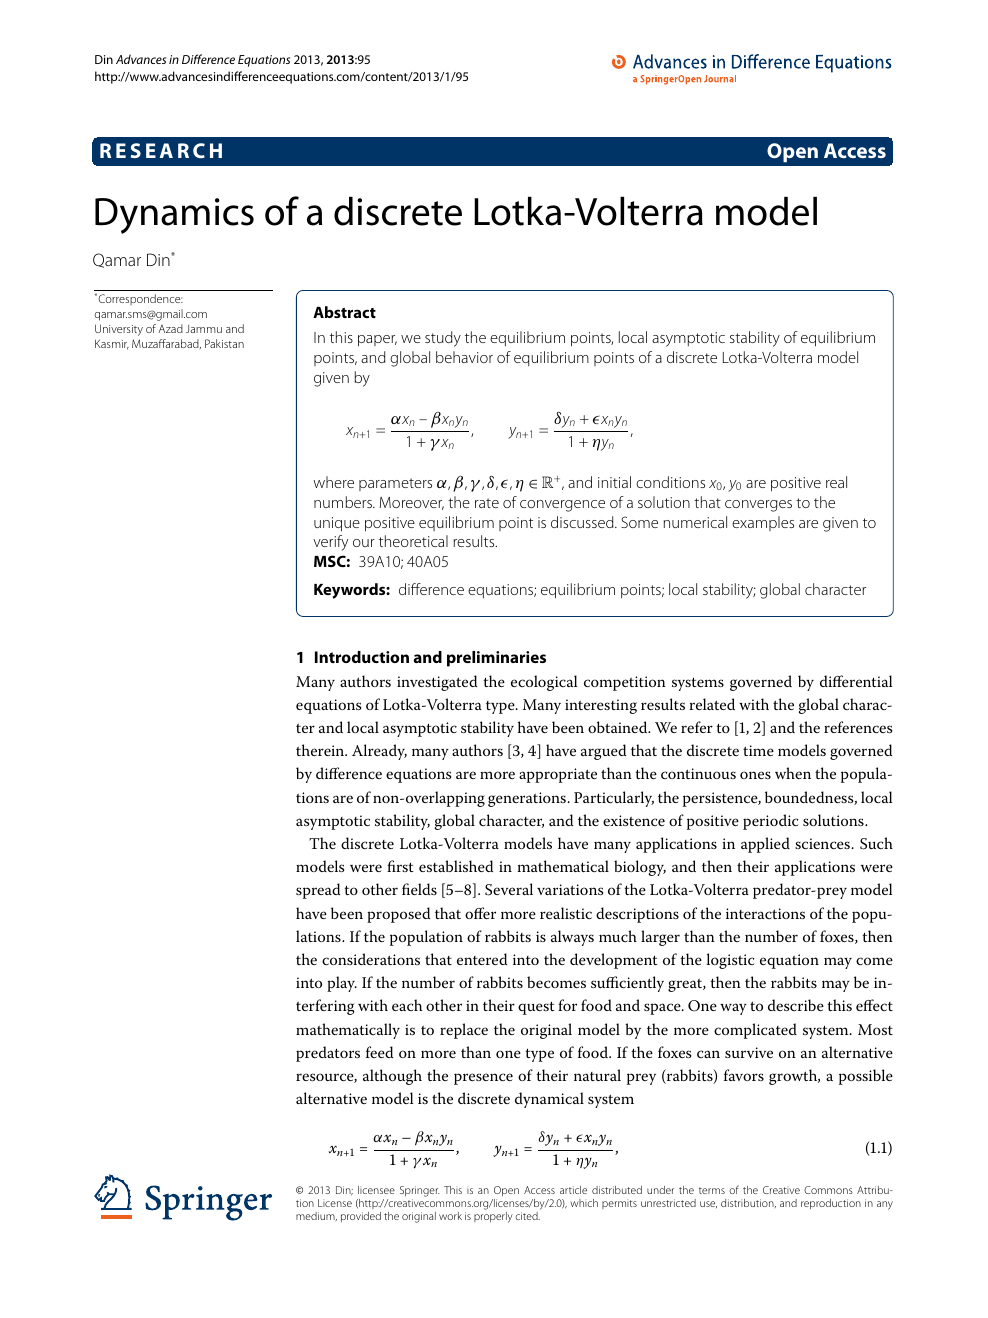 Dynamics Of A Discrete Lotka Volterra Model Topic Of Research Paper In Mathematics Download Scholarly Article Pdf And Read For Free On Cyberleninka Open Science Hub